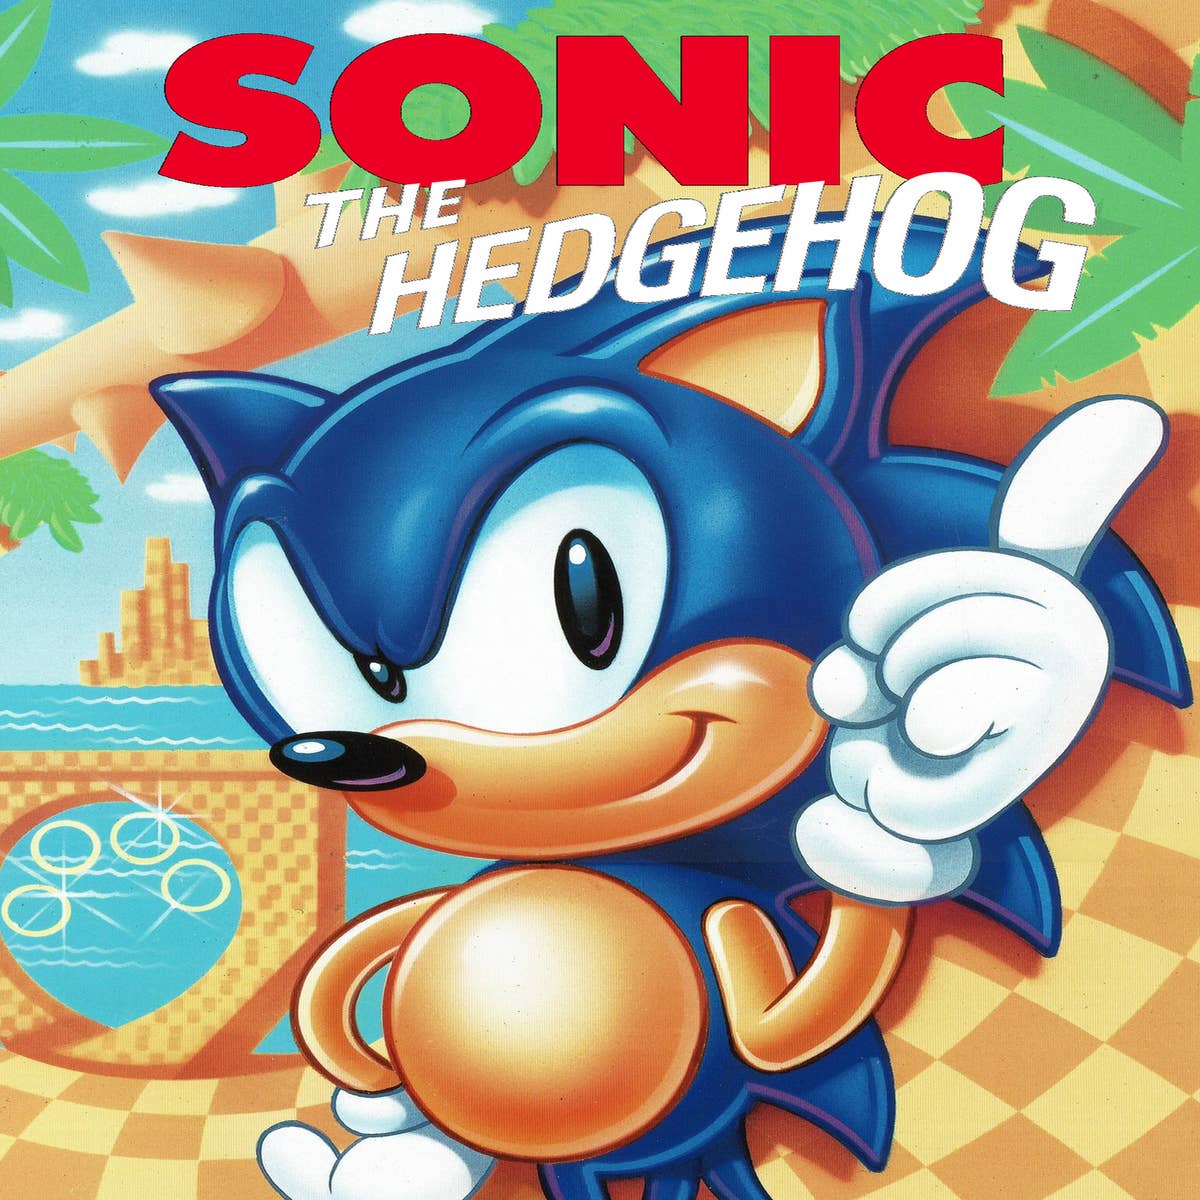 Dark Sonic doing that one pose from Sonic Frontiers : r/SonicTheHedgehog